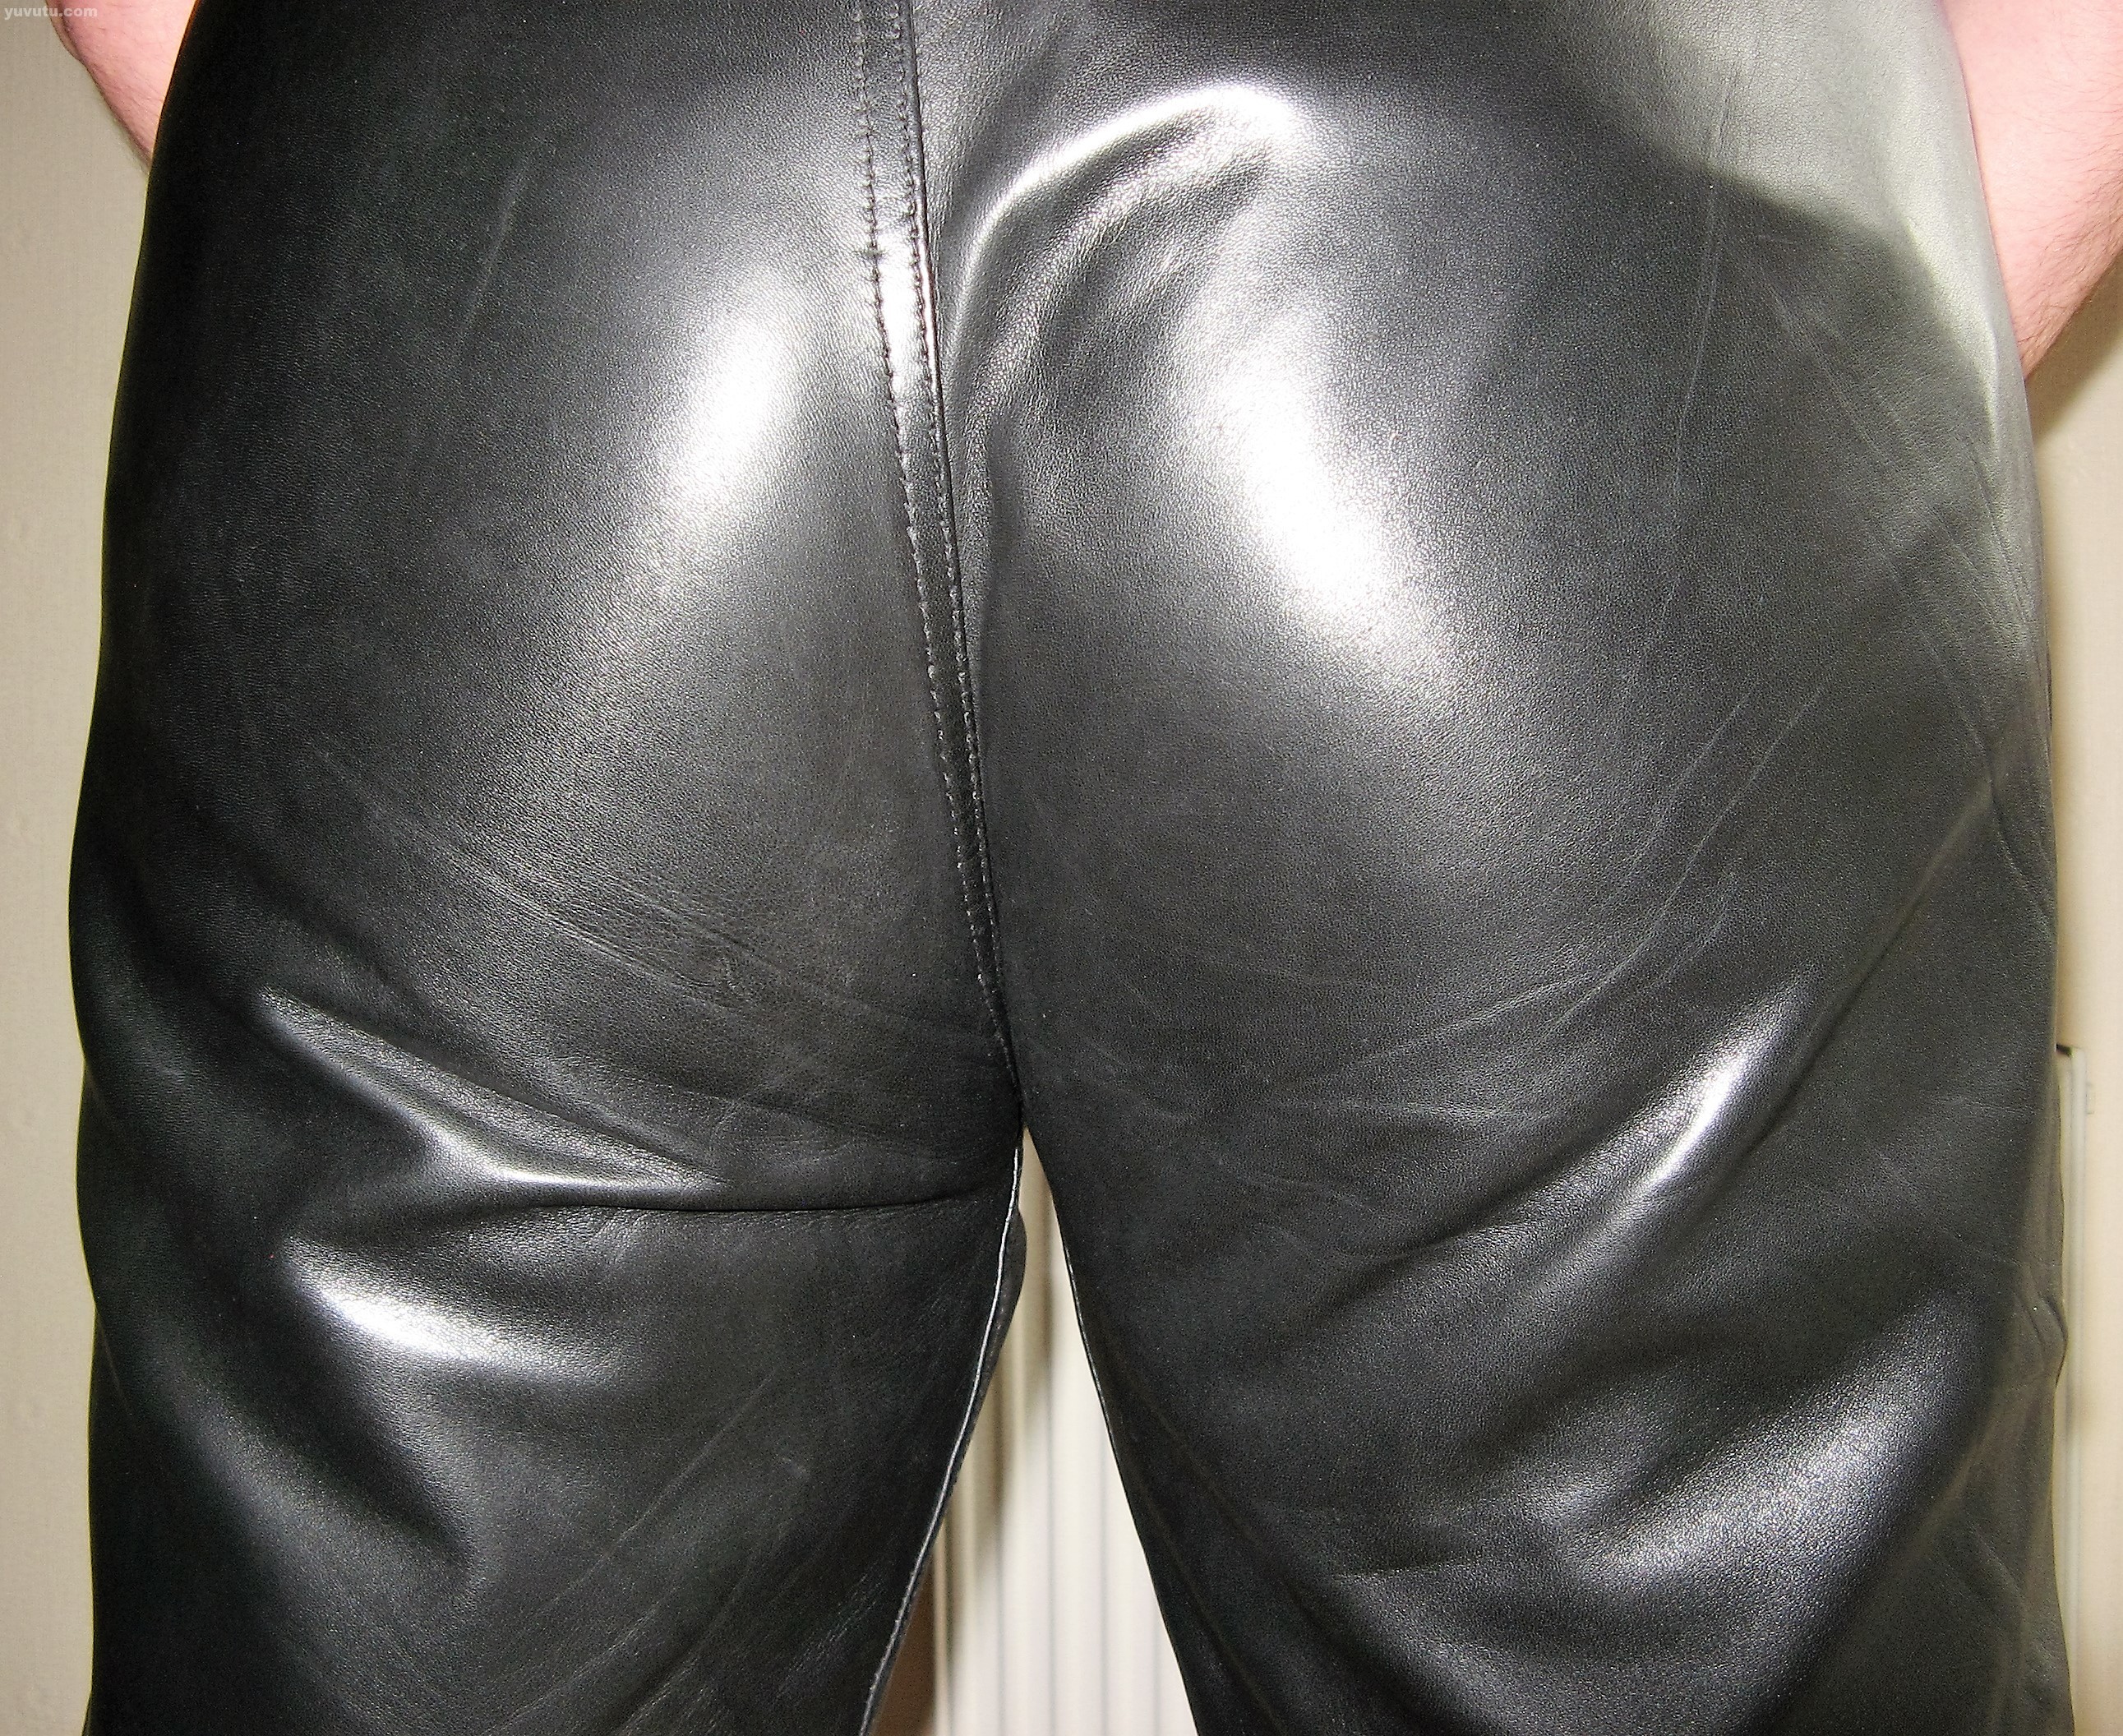 Tight Leather Anal - Black Leather joggers - Anal On Yuvutu Homemade Amateur Porn ...